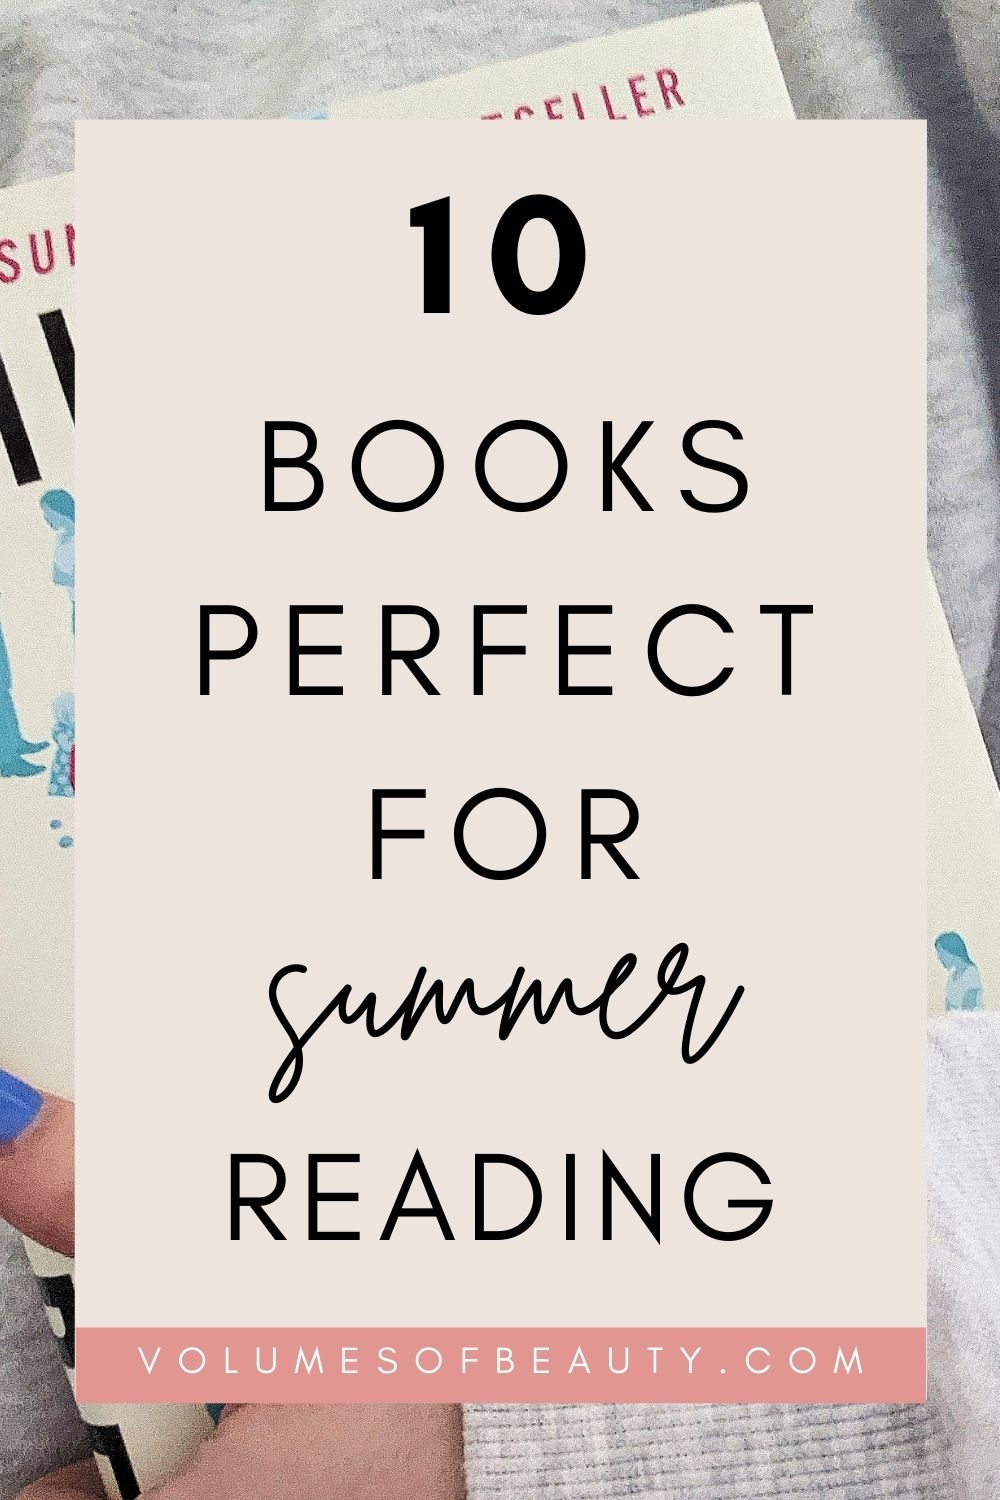 10 of the best books for summer reading - Volumes of Beauty